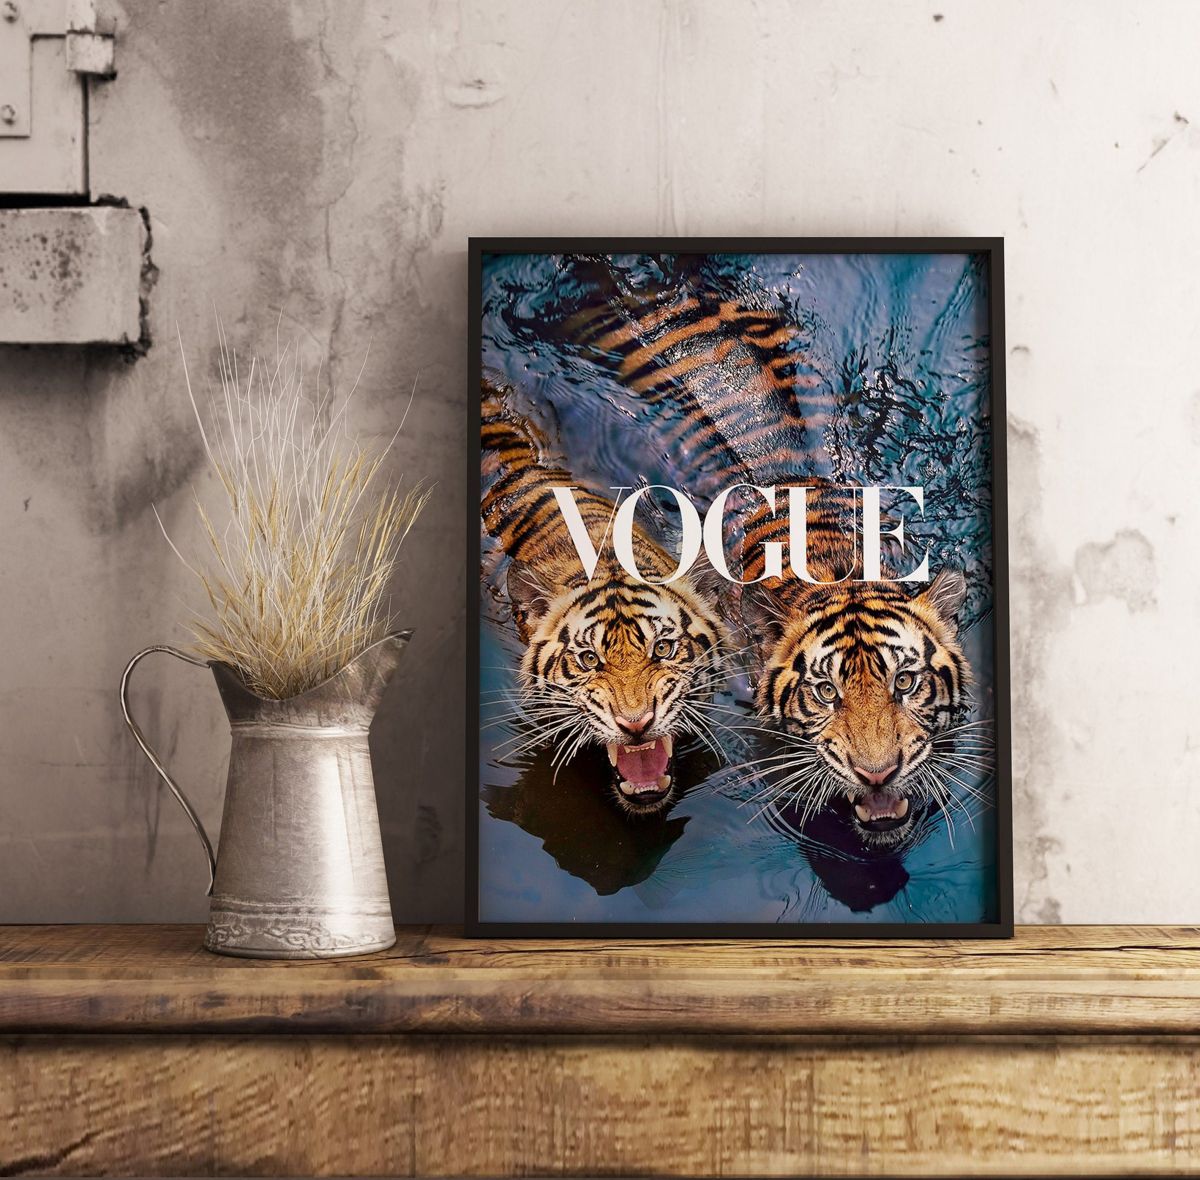 Vintage Tiger Vogue Cover Poster, Fashion Magazine Cover, Wall Art ...